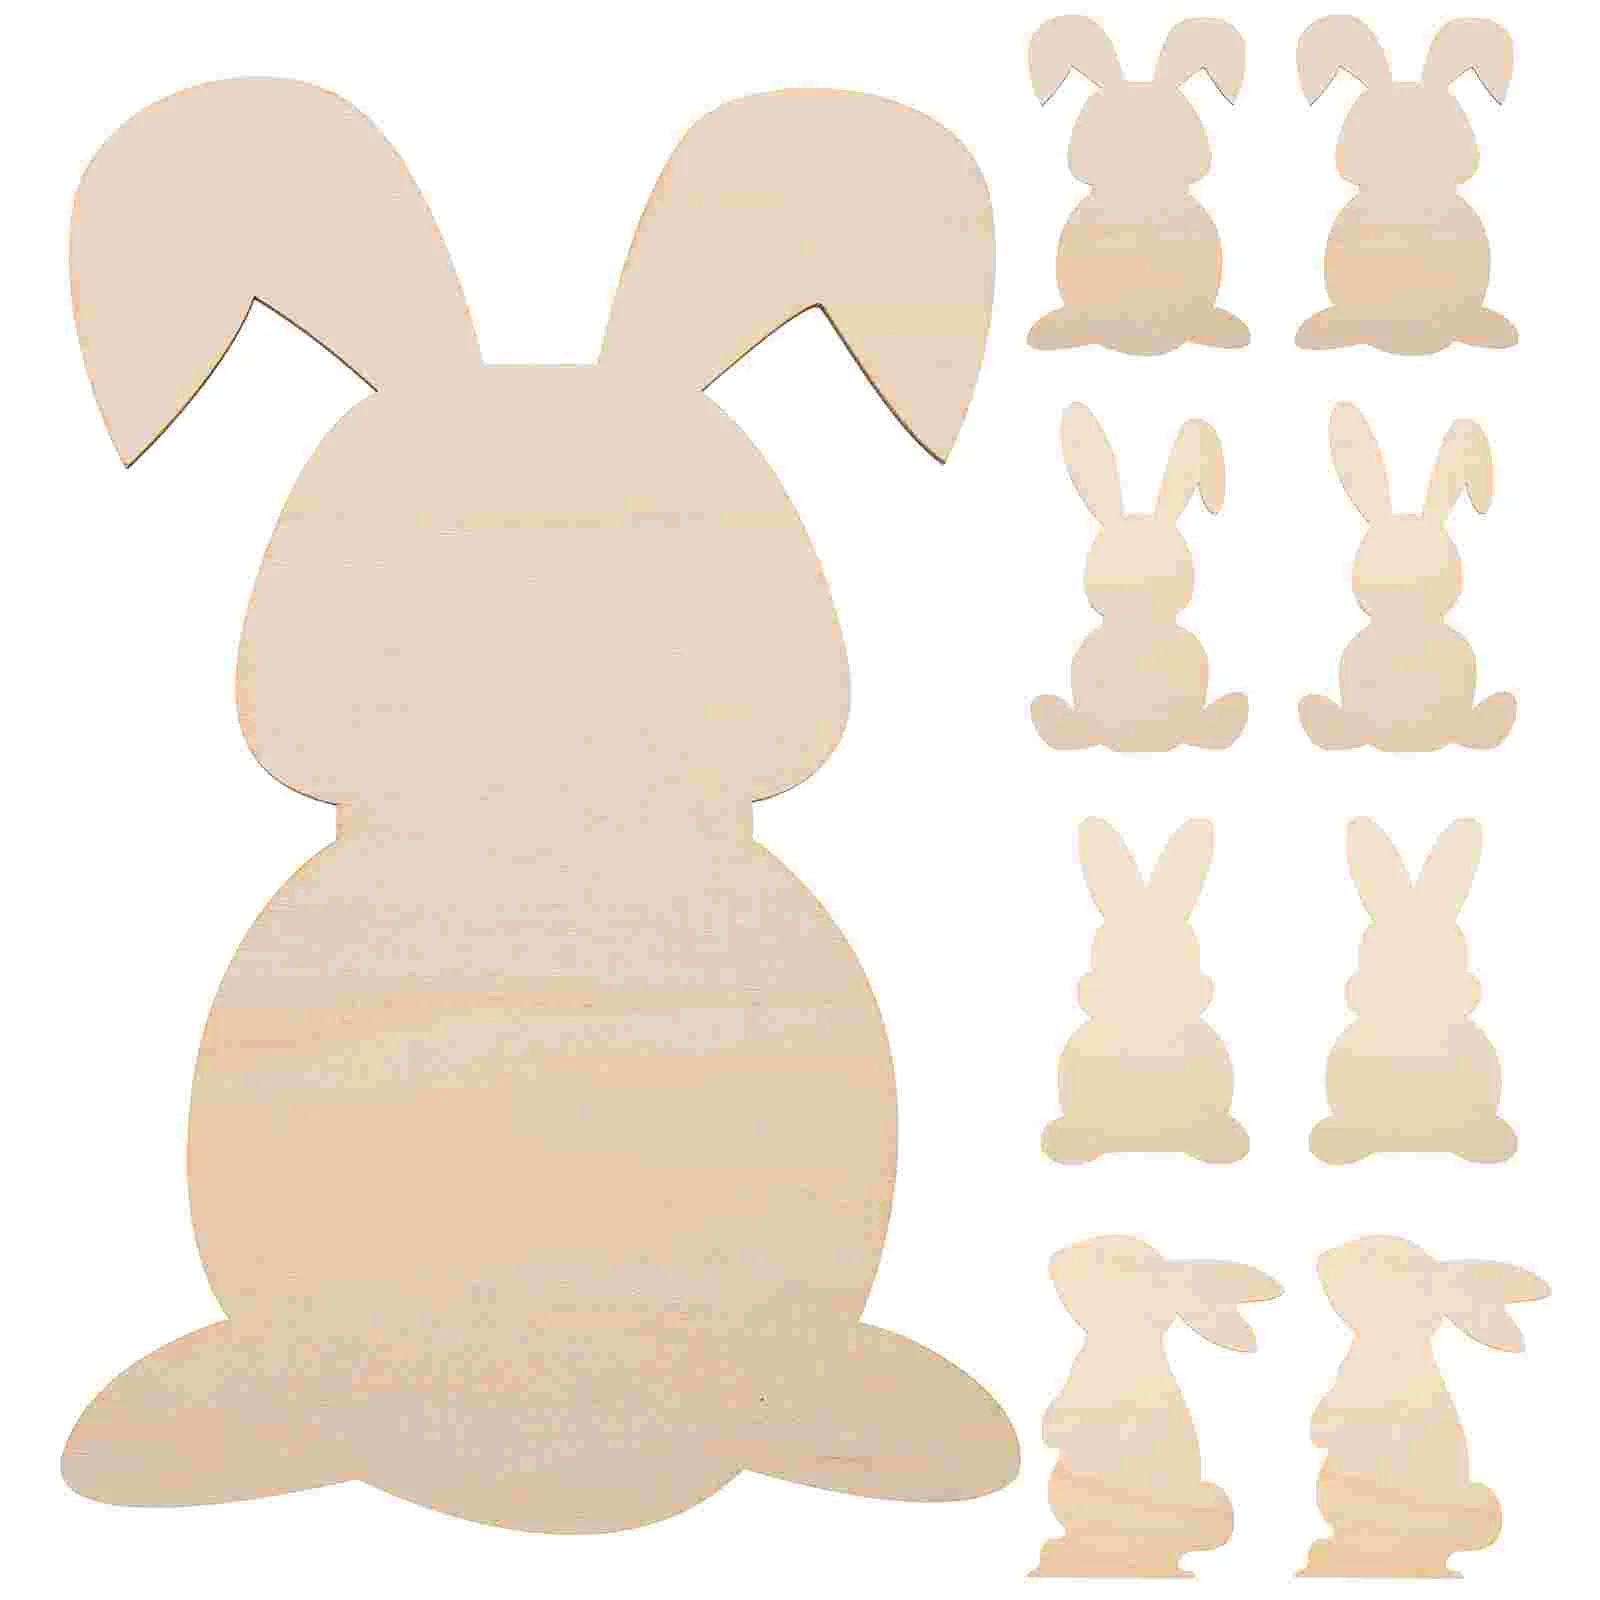 

10 Pcs Wood Bunny Cutout Hand Decor Easter Painting Crafts Bunny Decor Rabbit Shaped Wood Chips Blank Spring Wood Cutouts